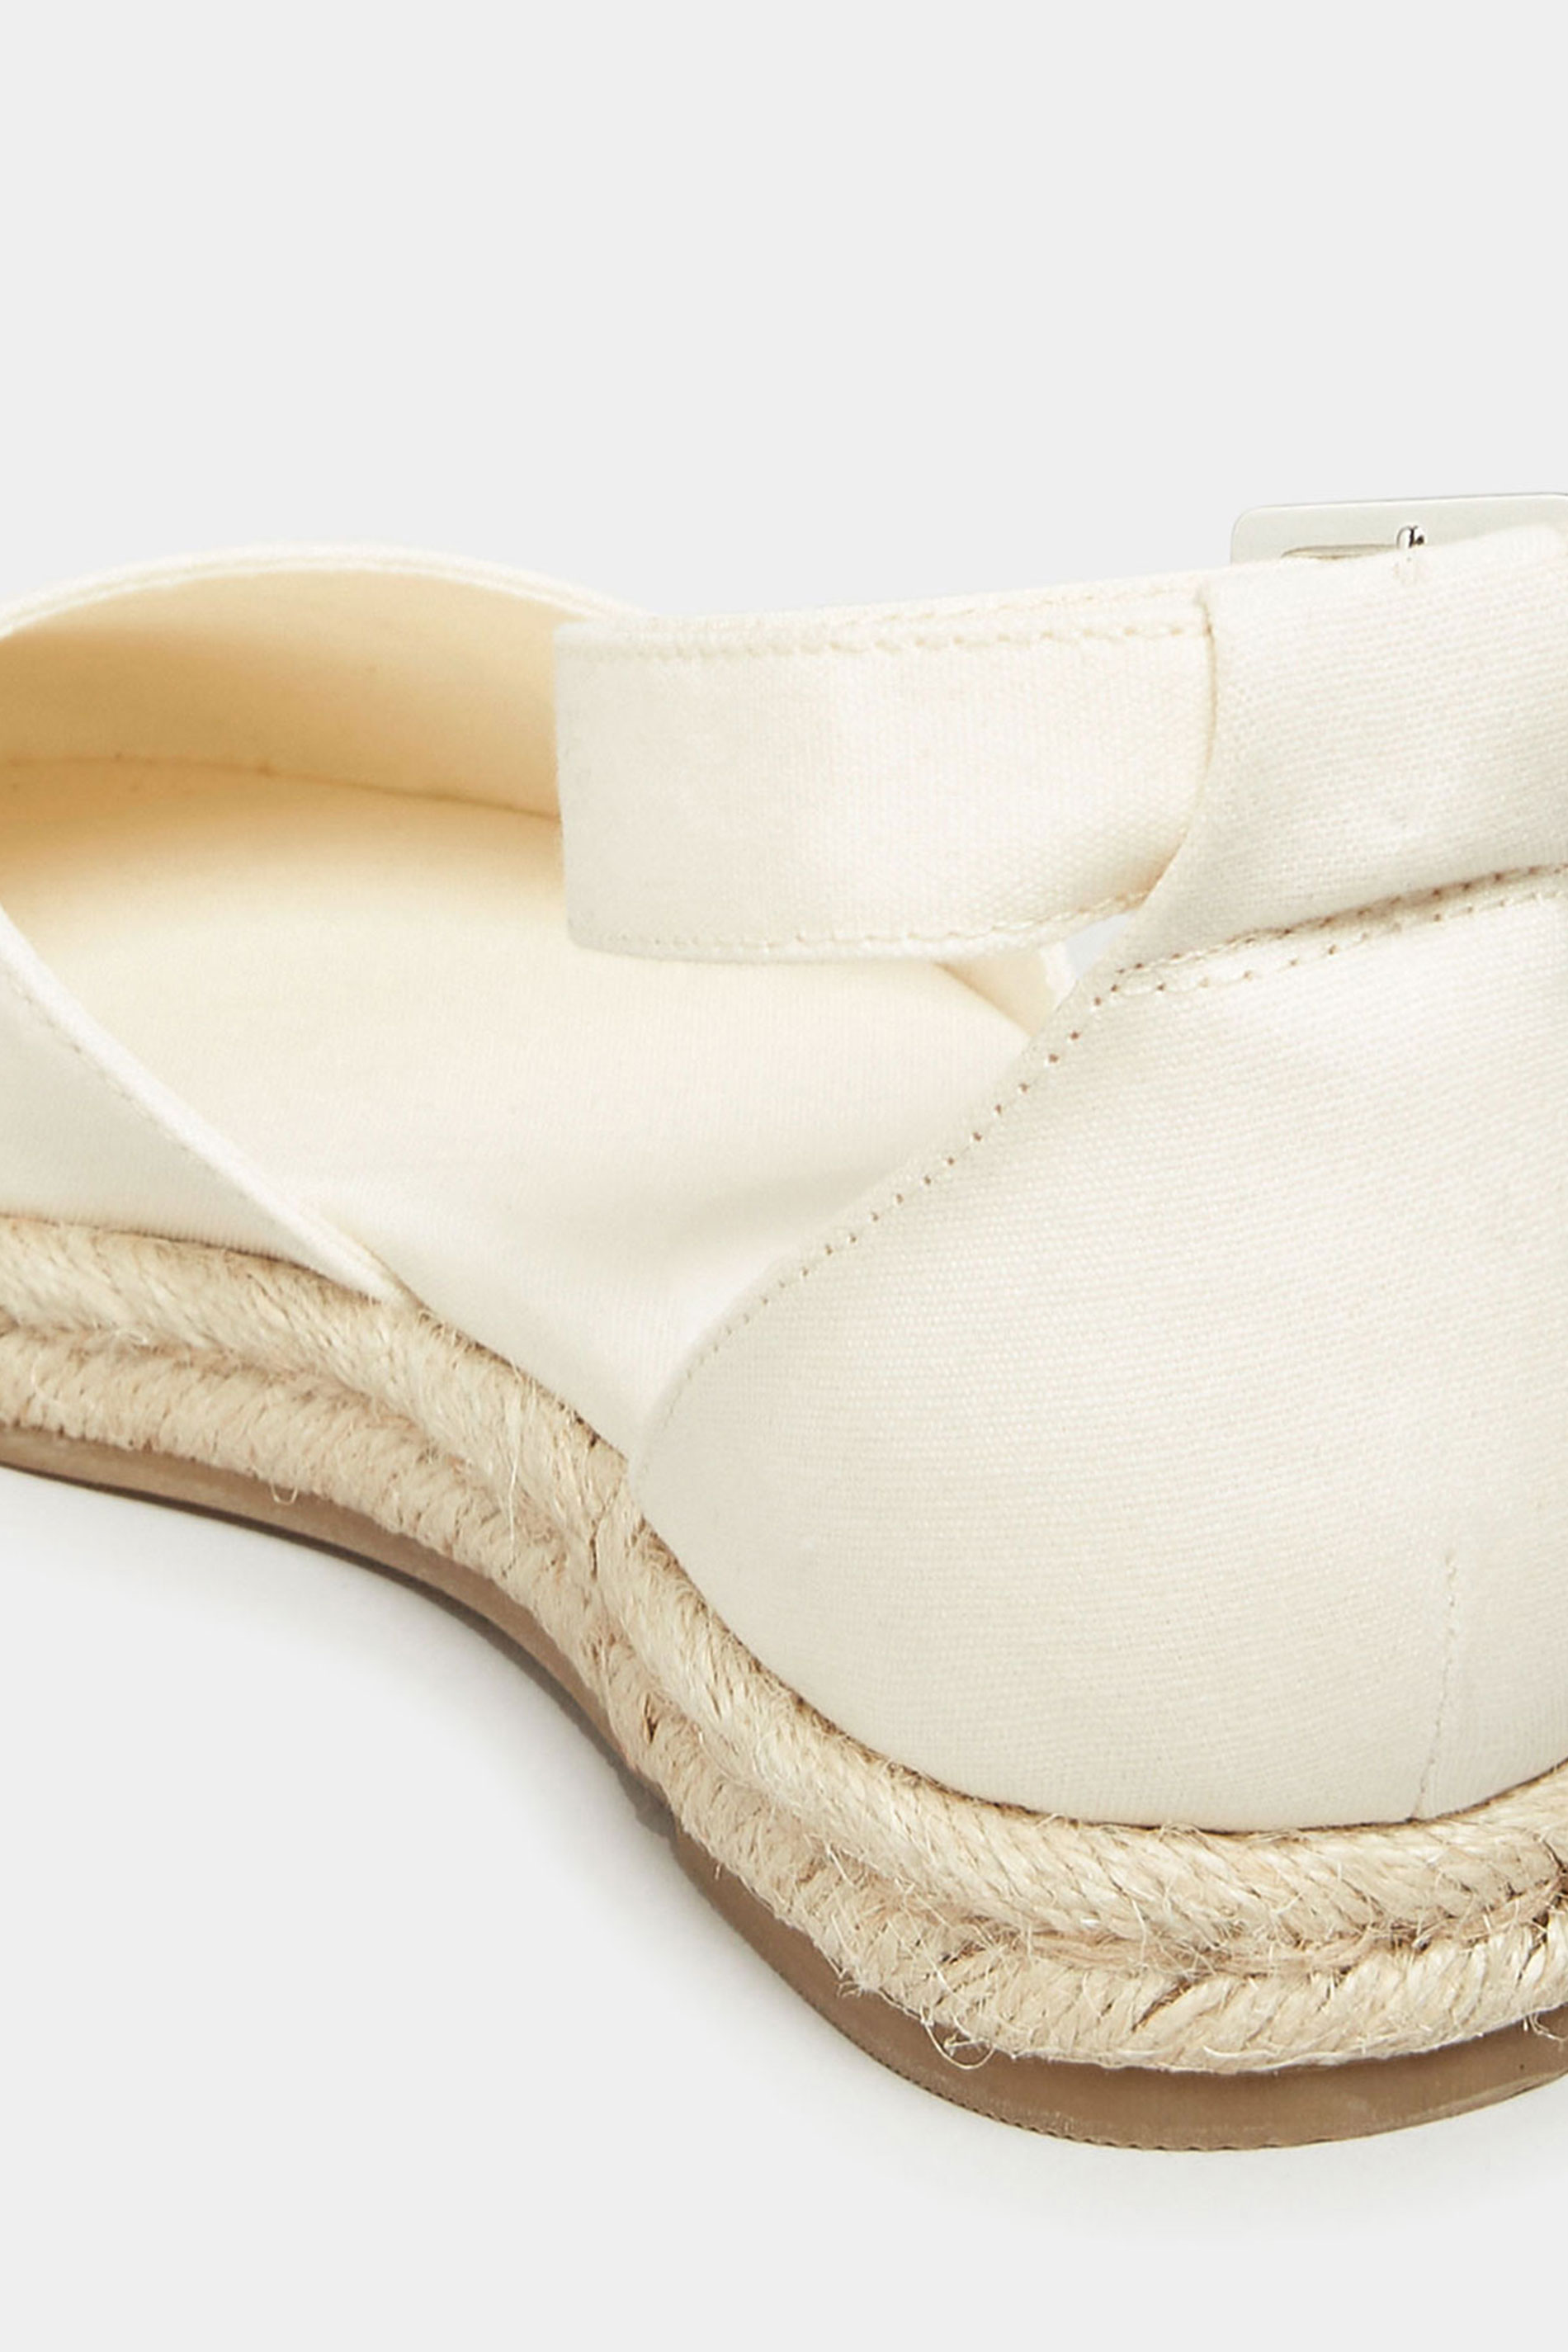 LTS White Closed Toe Espadrilles In Standard Fit | Long Tall Sally